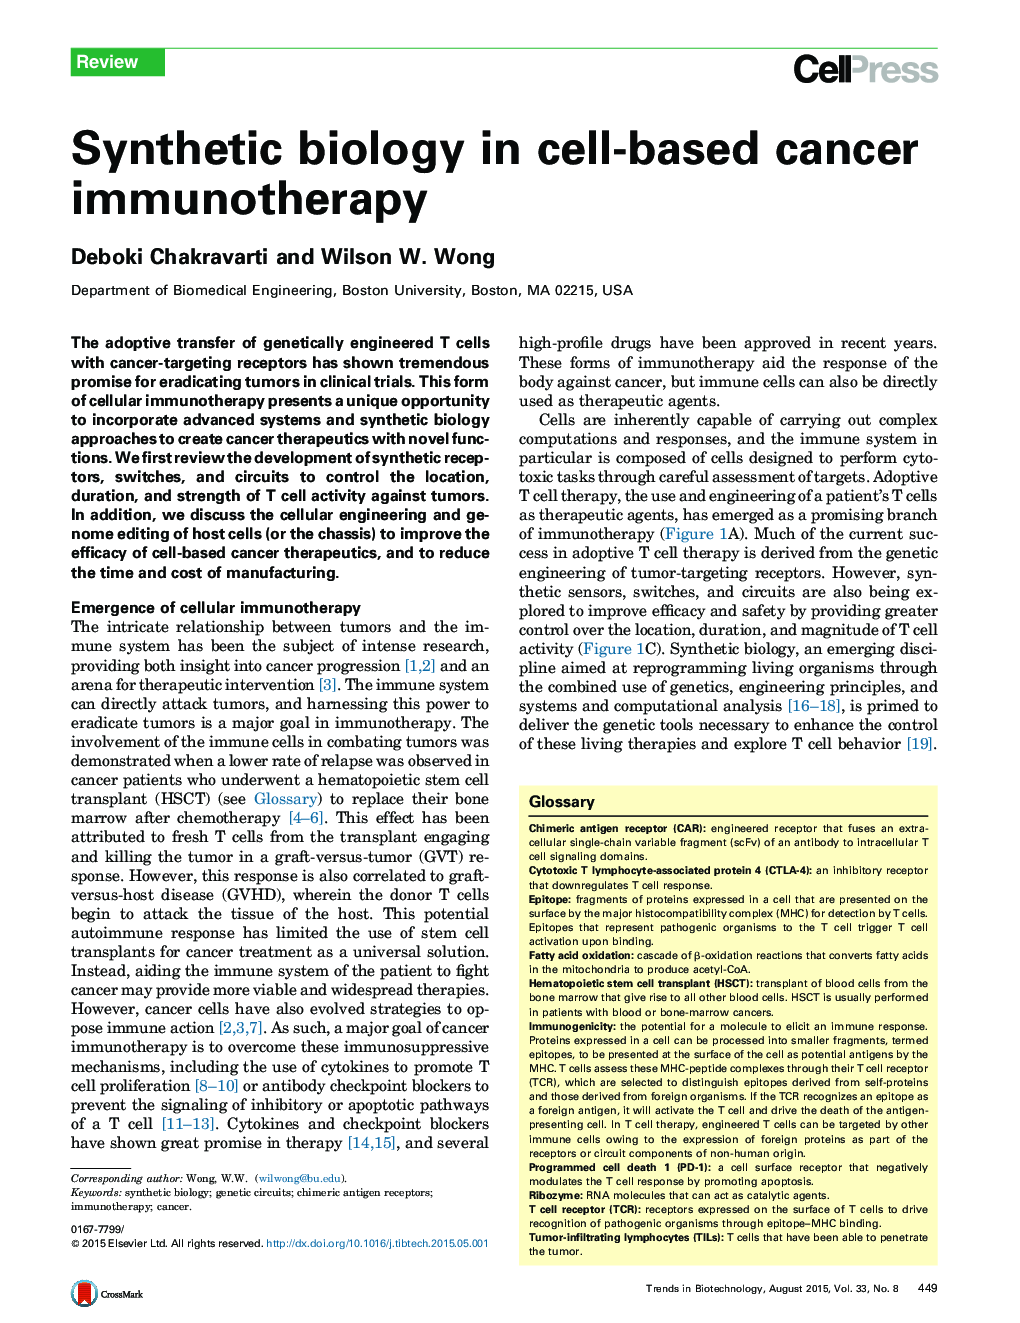 Synthetic biology in cell-based cancer immunotherapy